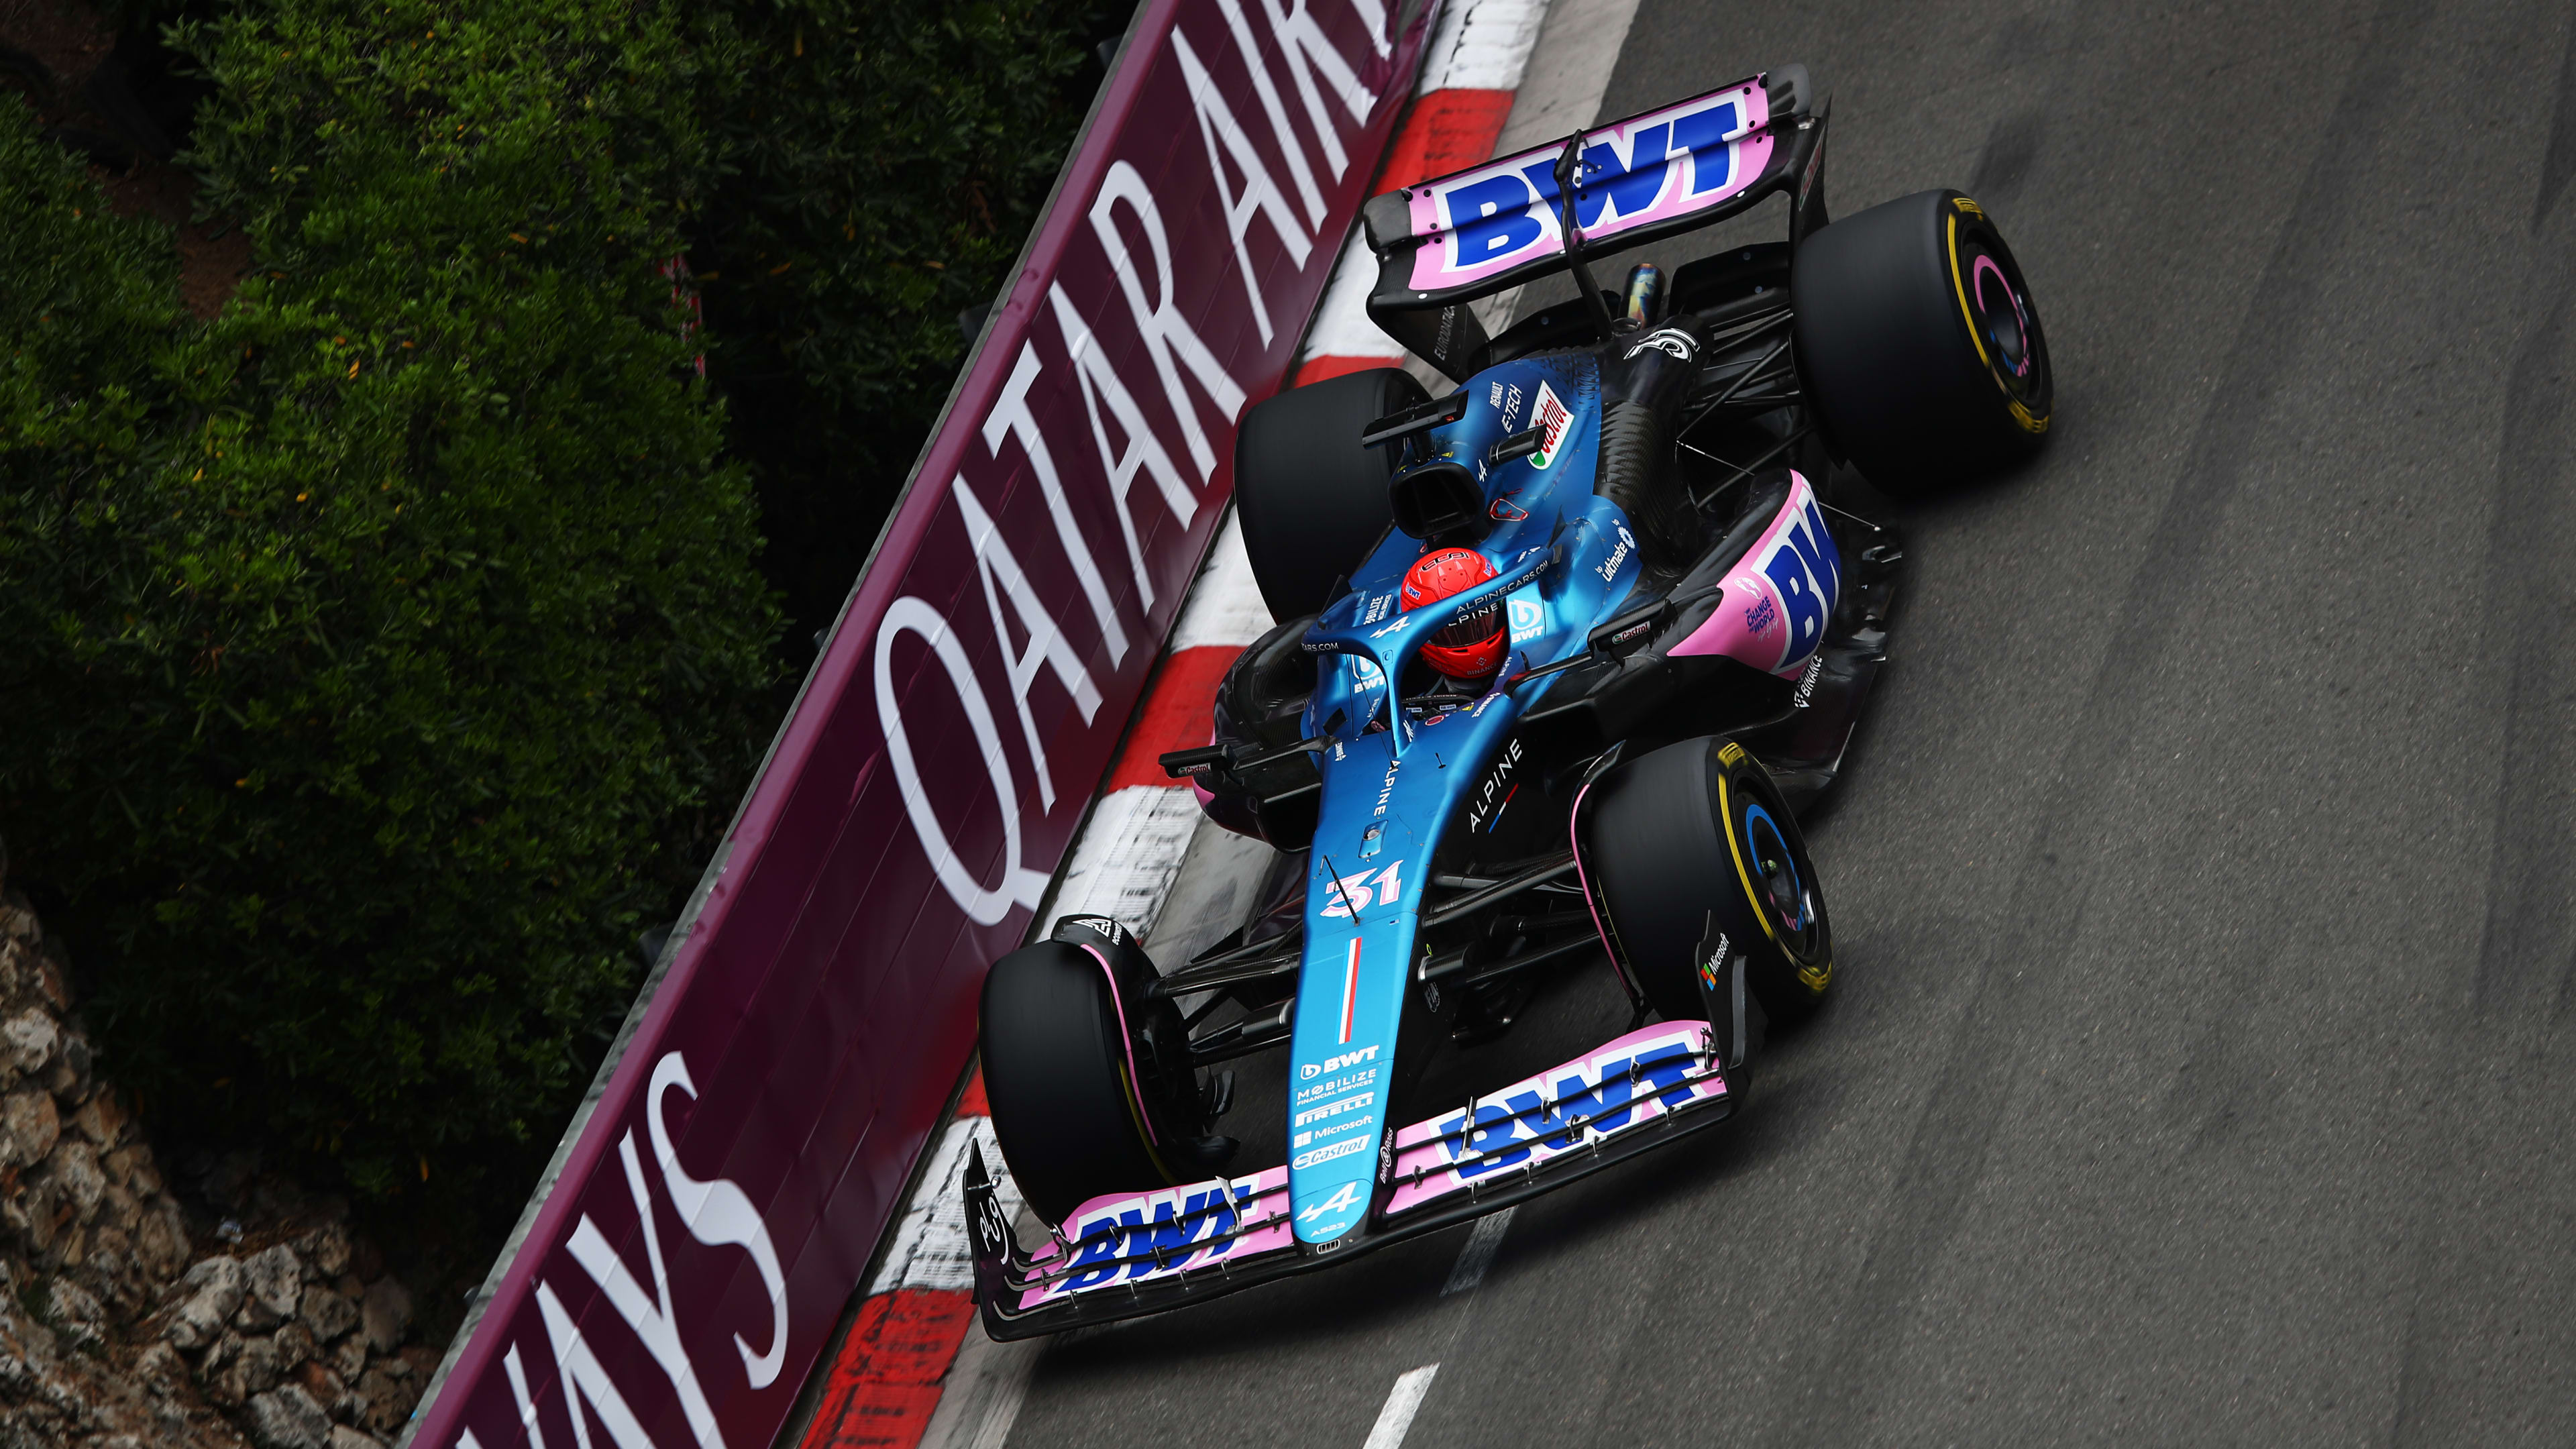 Alpine set out their goals for the 2022 F1 season